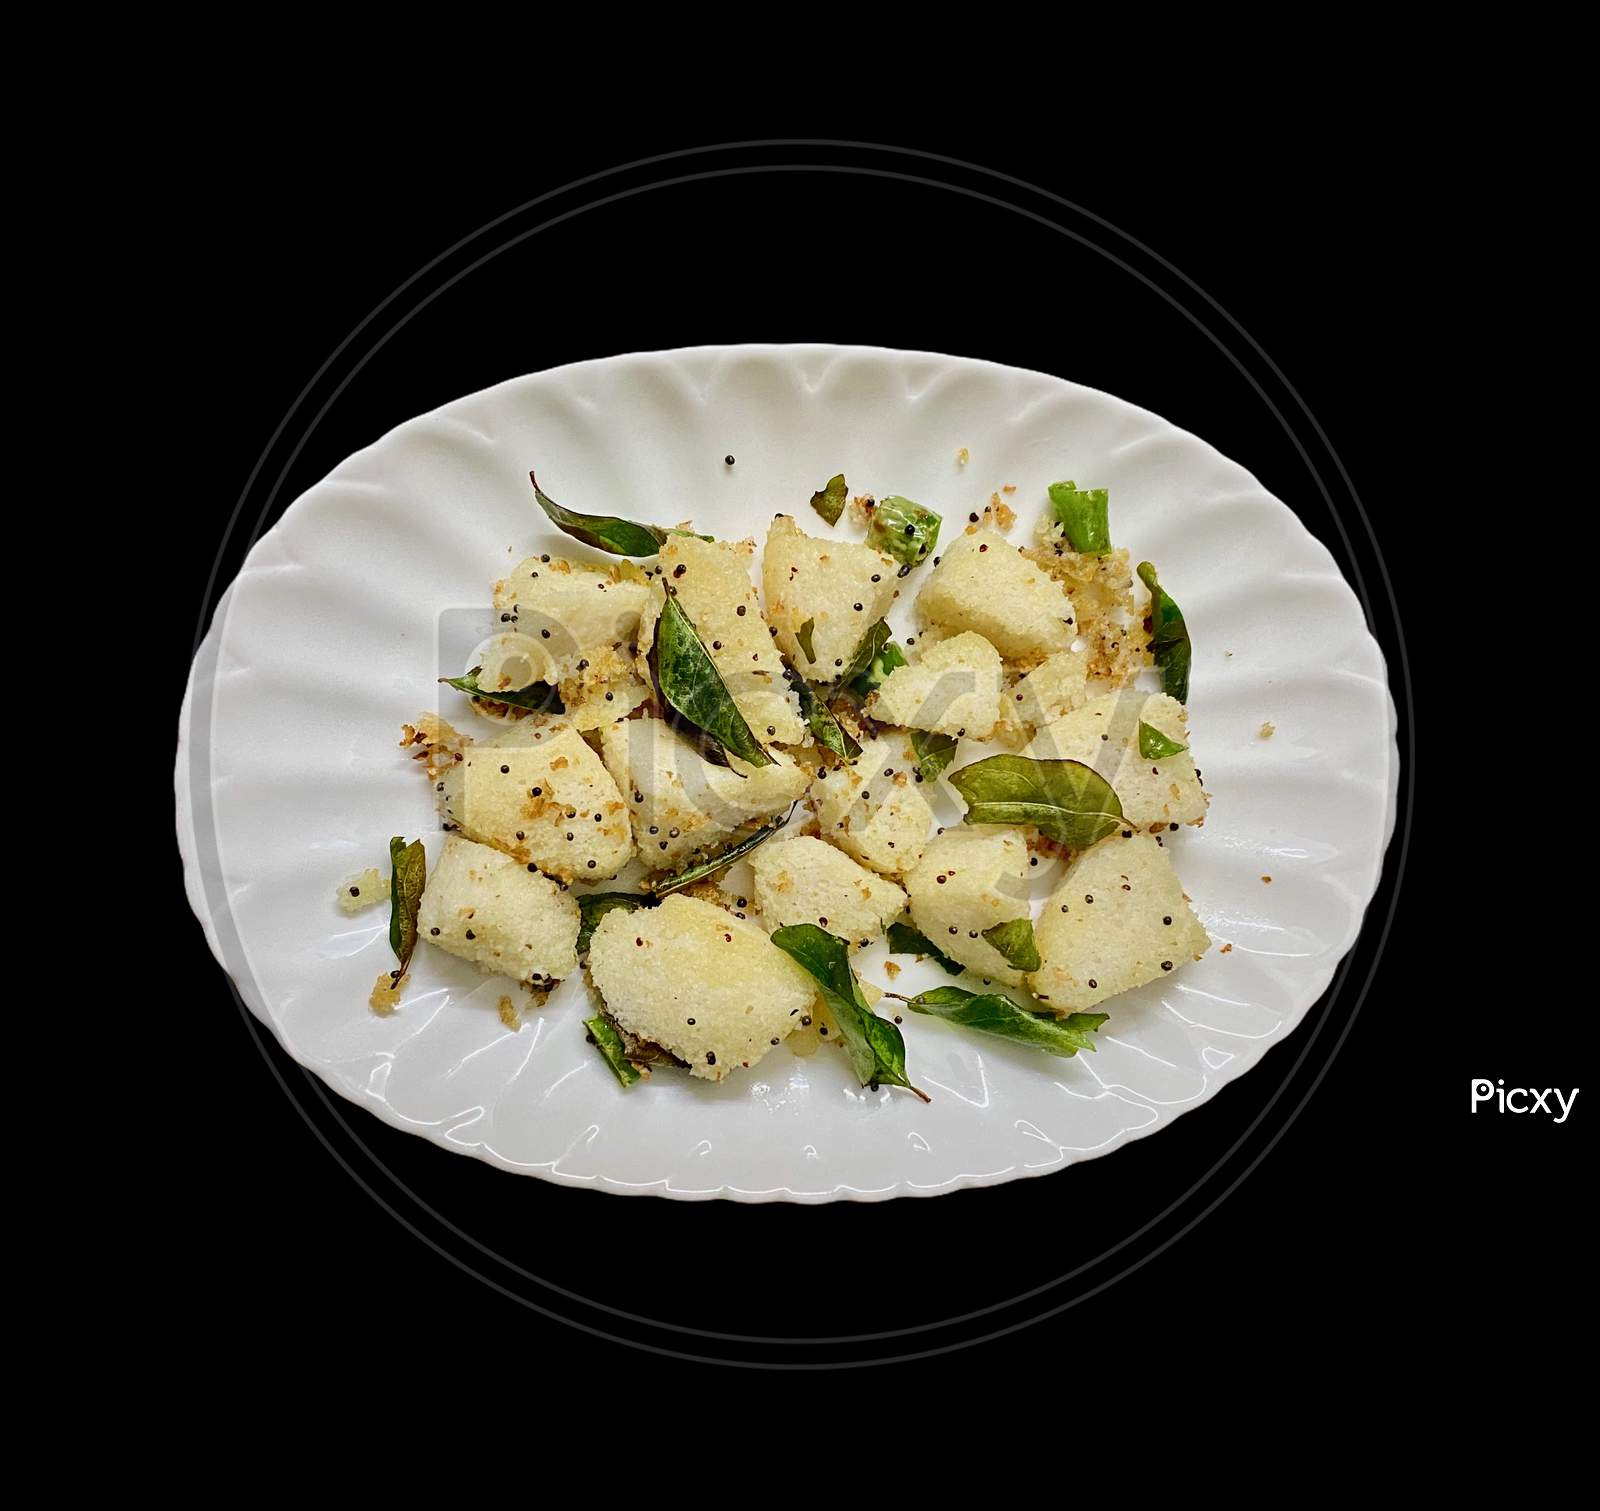 Delicious Seasoned Or Fry Idly Or Idli Served In A Plate